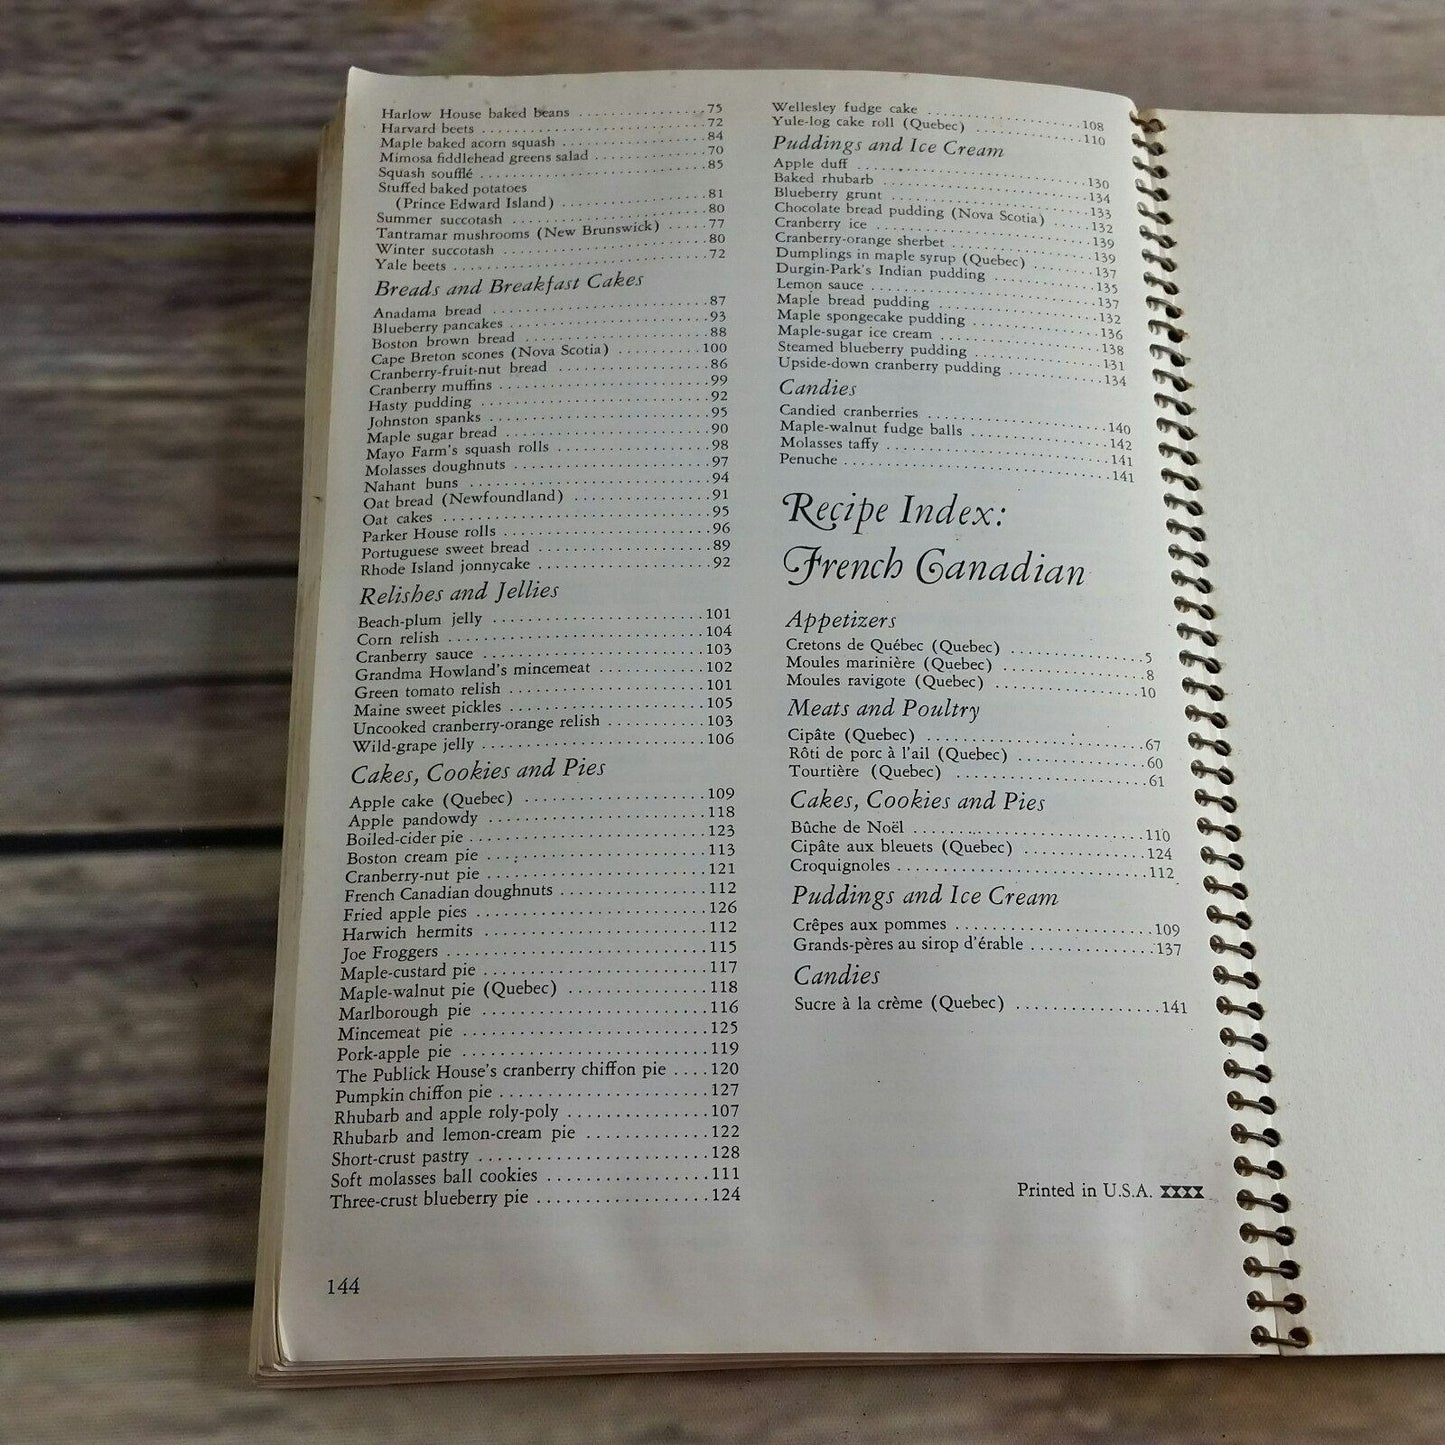 Vintage Cookbook New England American Cooking Recipes Time Life Books Foods of the World 1970 Spiral Bound New England Recipes